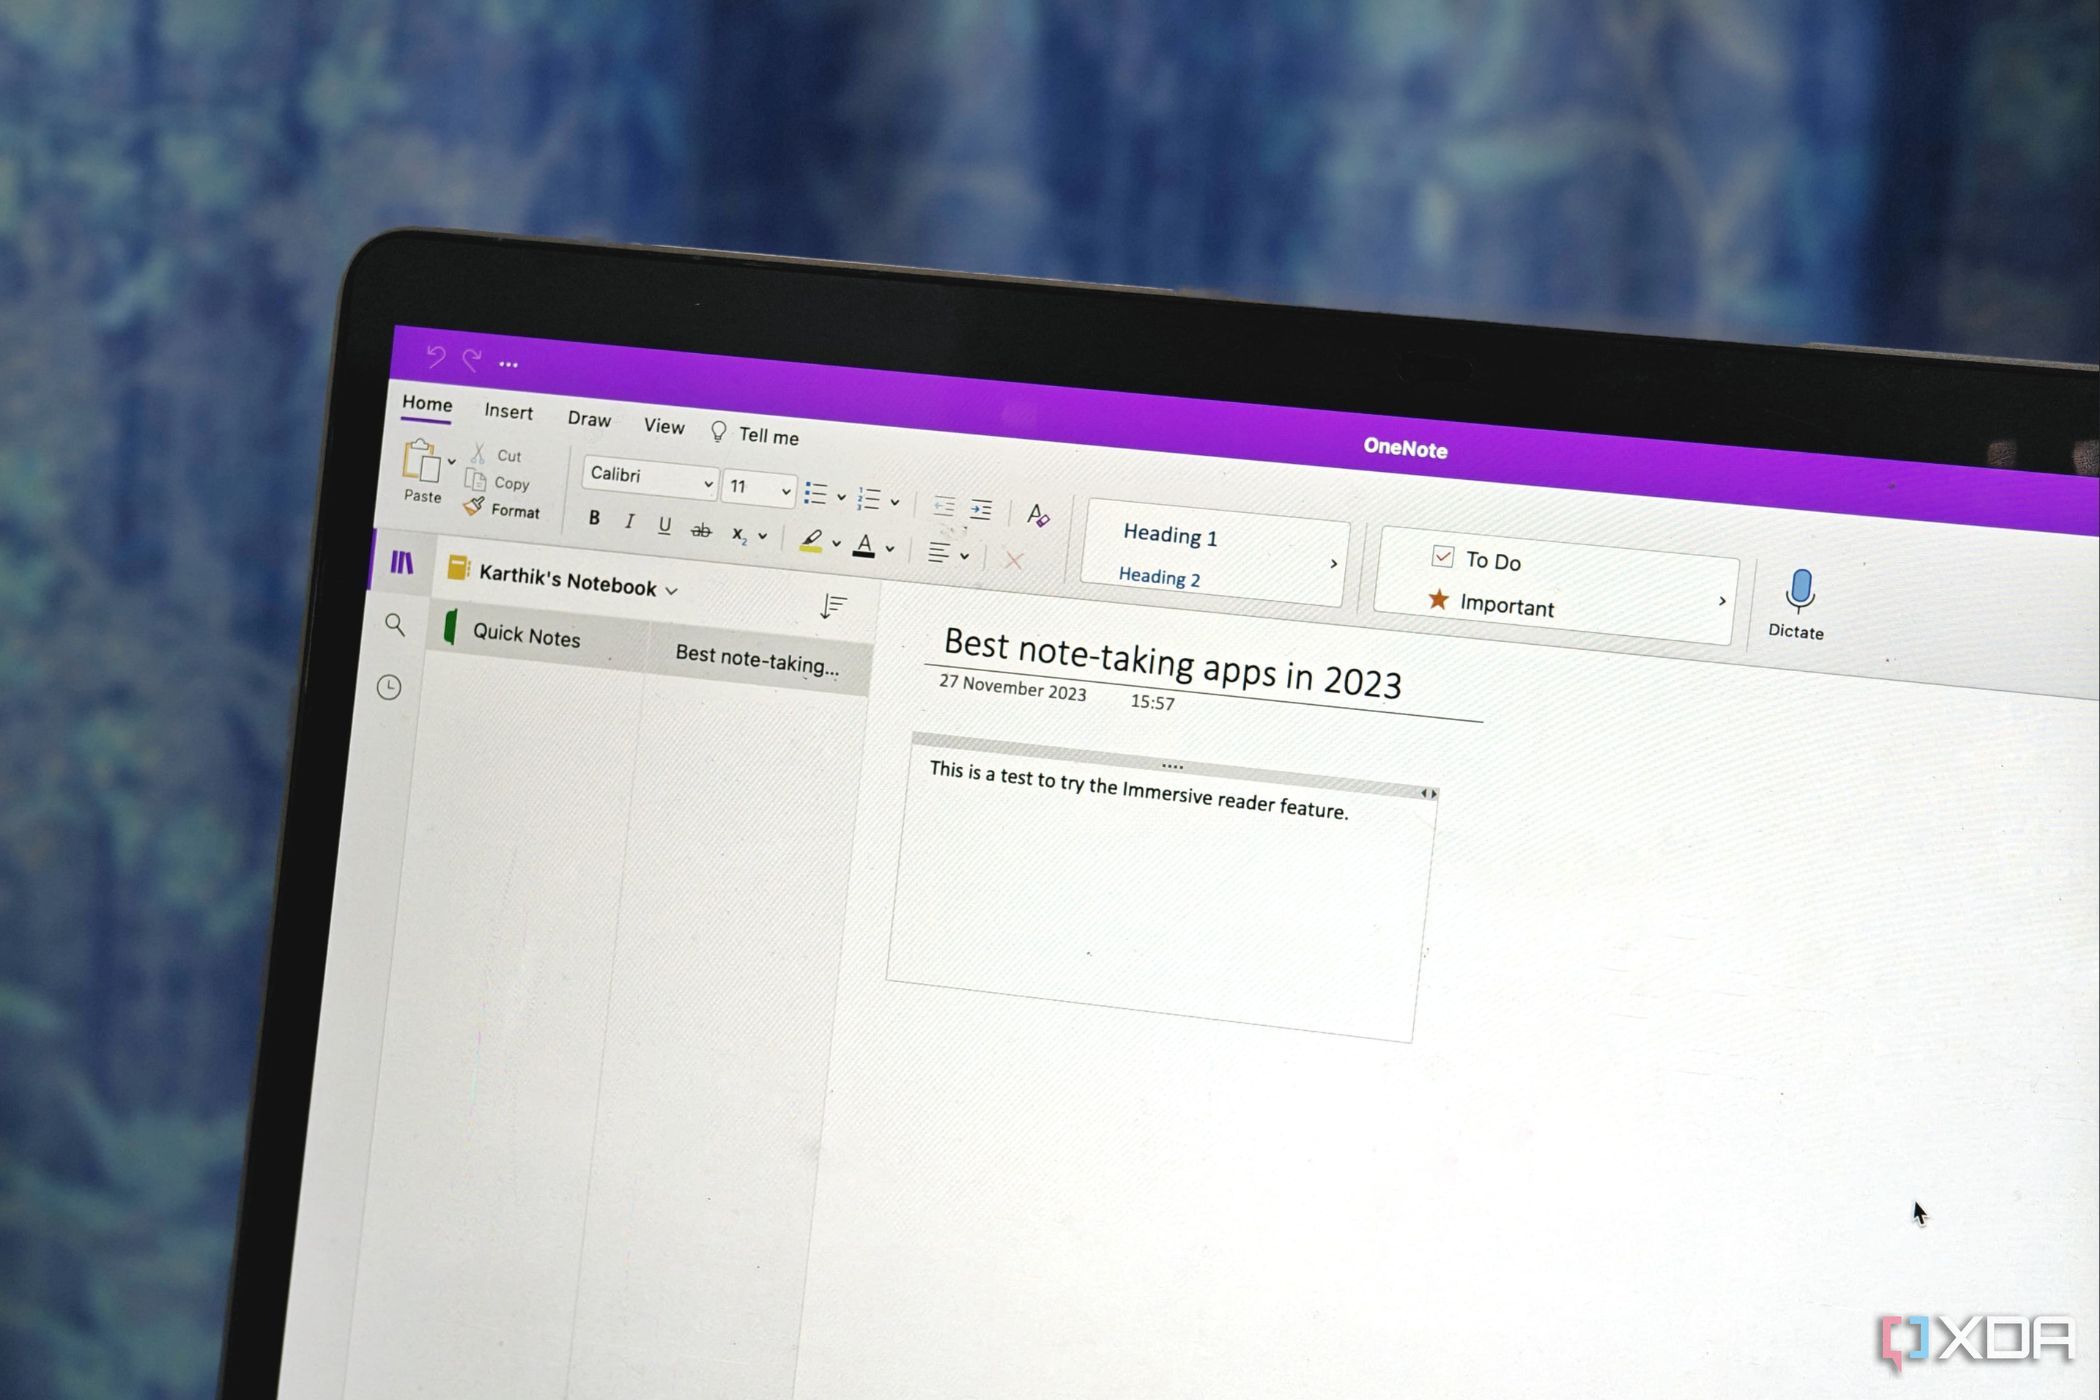 An image showing OneNote app open on a MacBook.